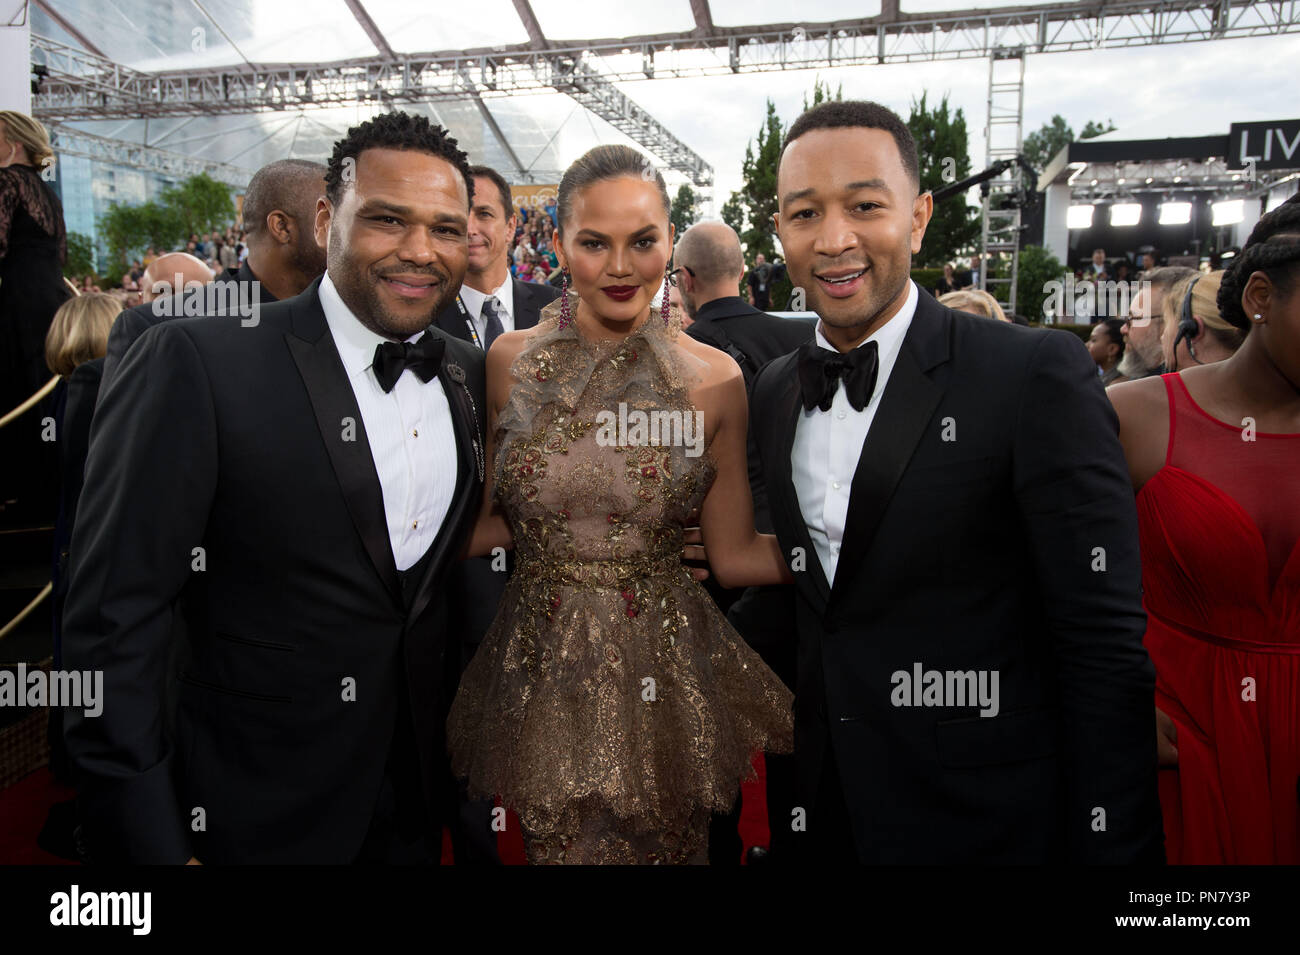 Nominated for BEST PERFORMANCE BY AN ACTOR IN A TELEVISION SERIES – COMEDY OR MUSICAL for his role in 'Black-ish,' actor Anthony Anderson, Chrissy Teigen, and John Legend attend the 74th Annual Golden Globes Awards at the Beverly Hilton in Beverly Hills, CA on Sunday, January 8, 2017.  File Reference # 33198 194JRC  For Editorial Use Only -  All Rights Reserved Stock Photo